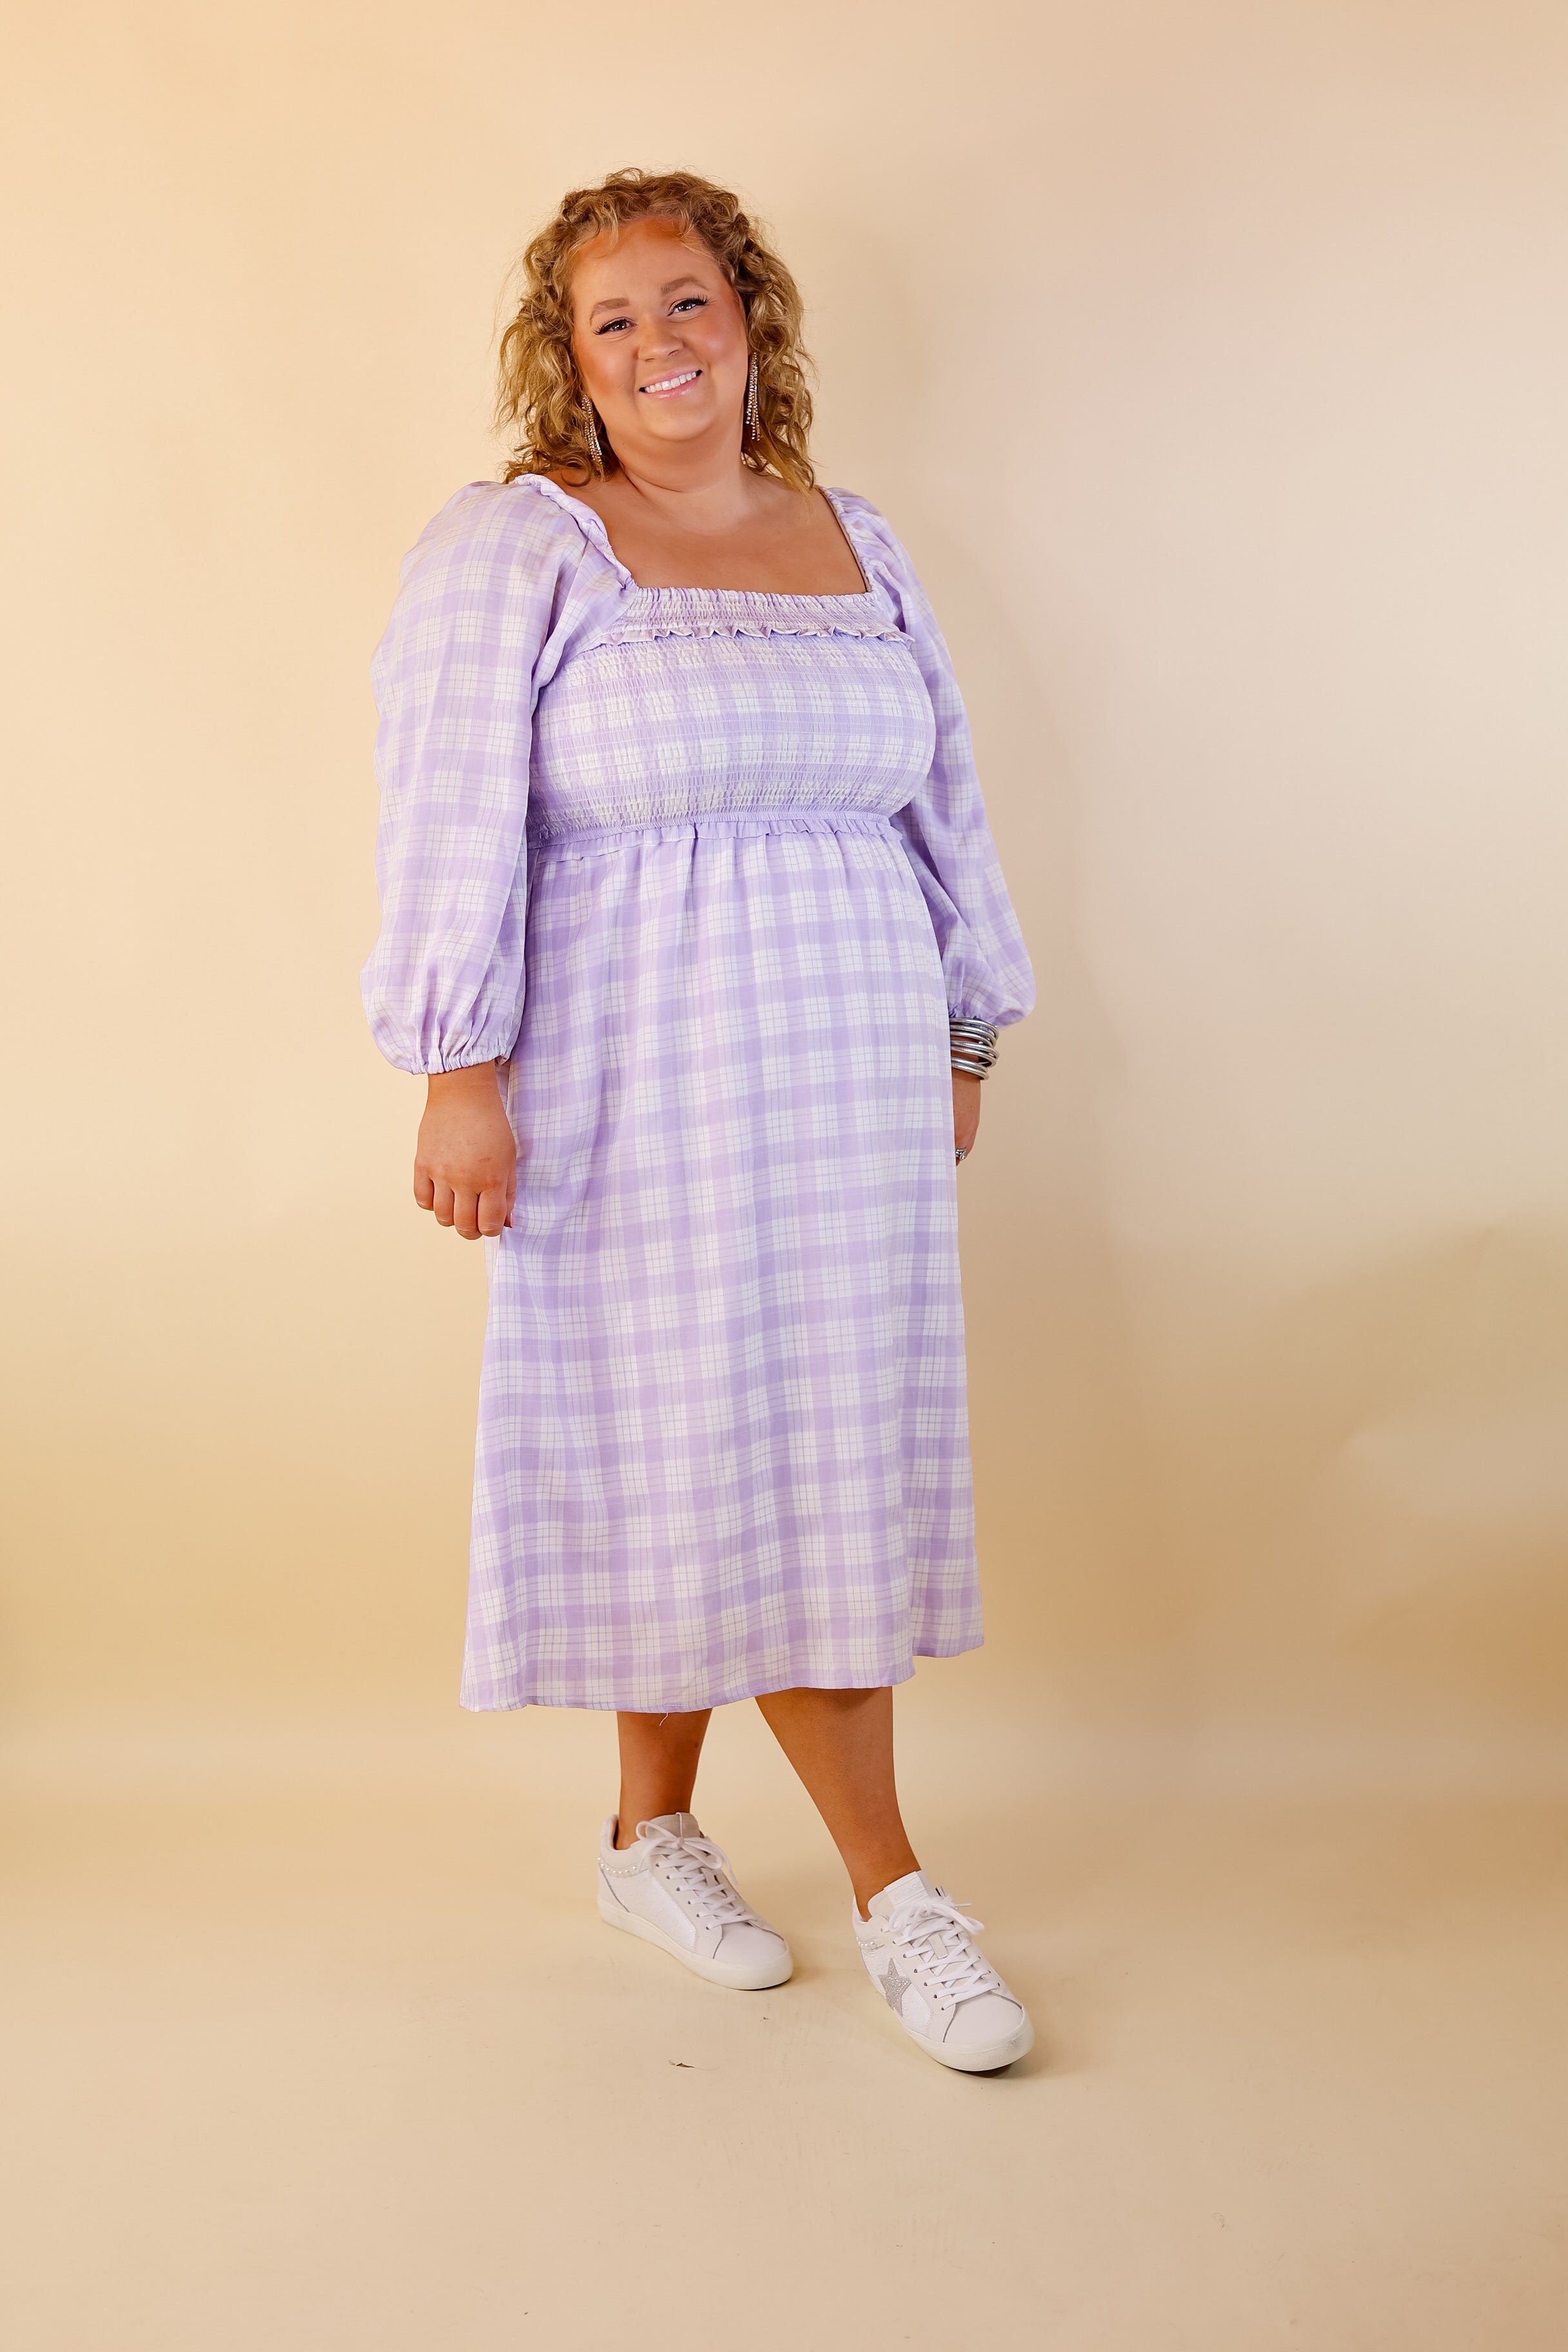 Adorable Impression Plaid Midi Dress with Smocked Bodice in Lavender Purple - Giddy Up Glamour Boutique